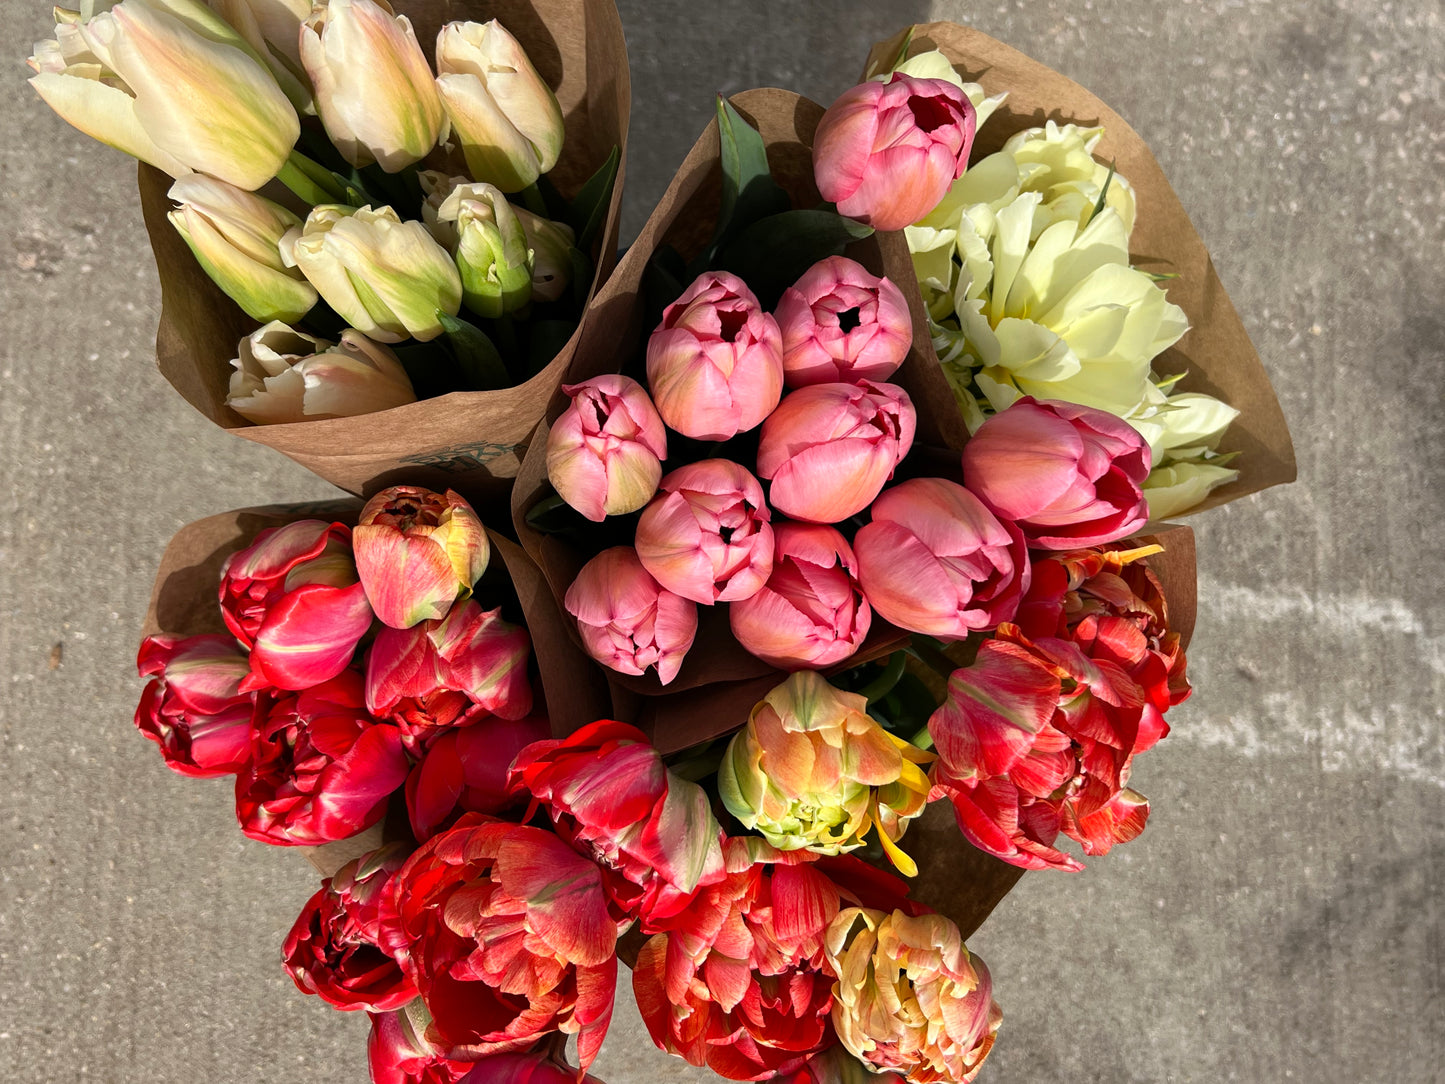 Tulip Box - Sustainably Grown Local Tulips: Delivered from Our Farm to Your Doorstep